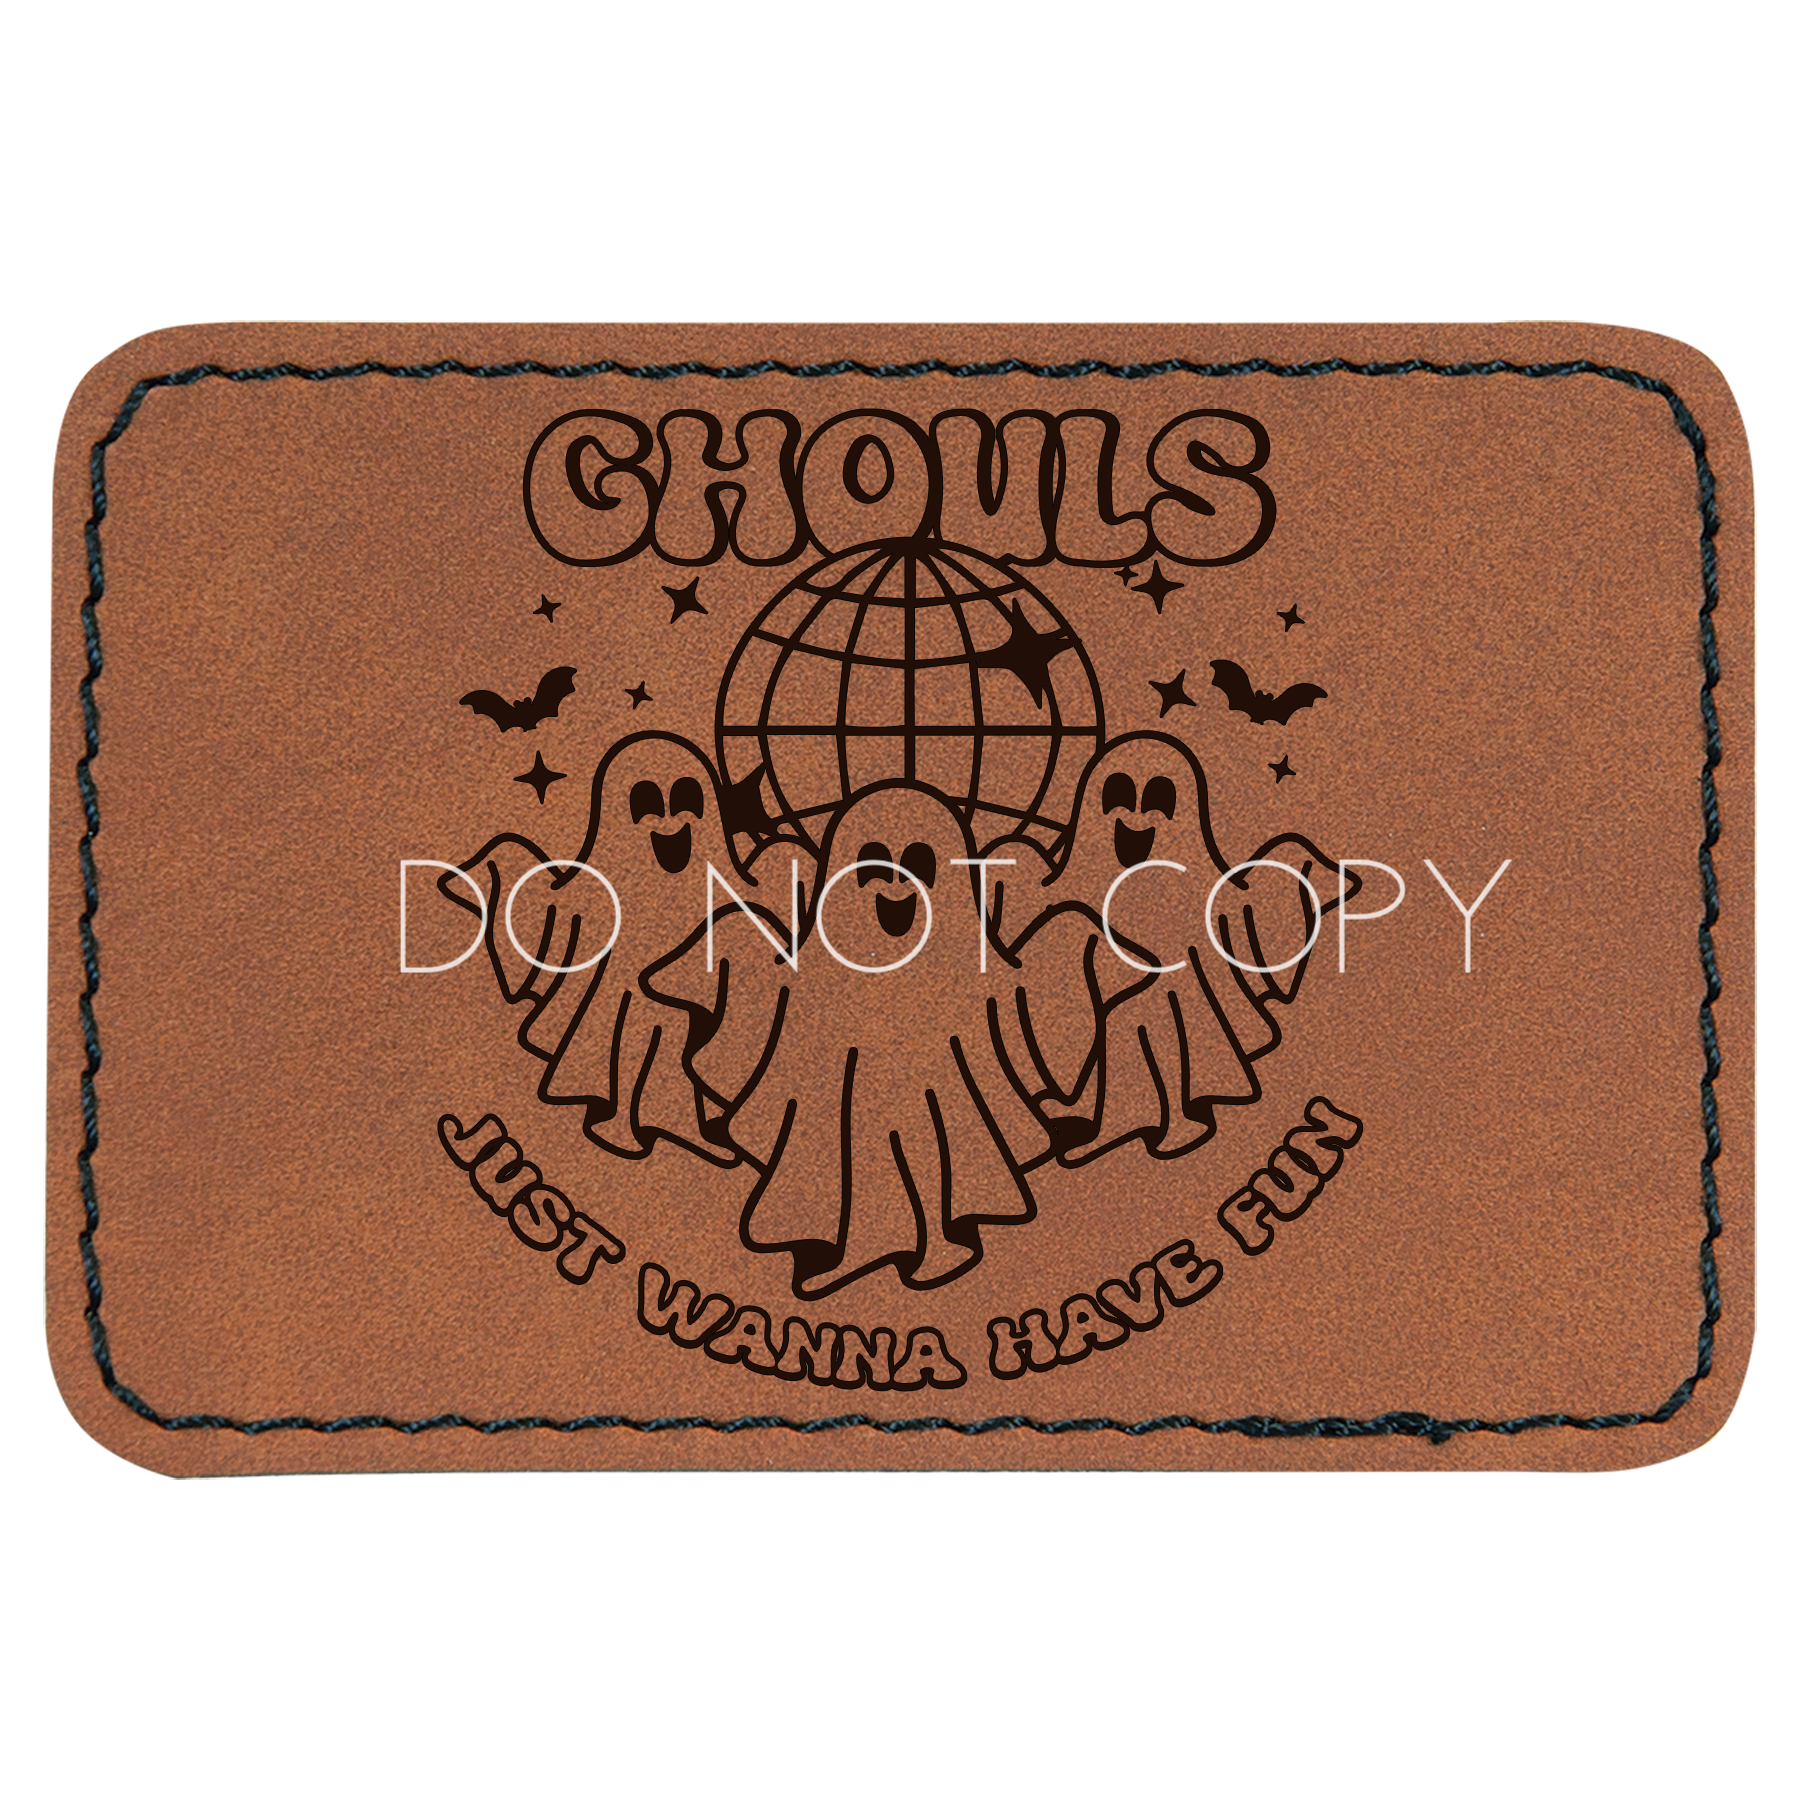 Ghouls Just Wanna Have Fun Patch